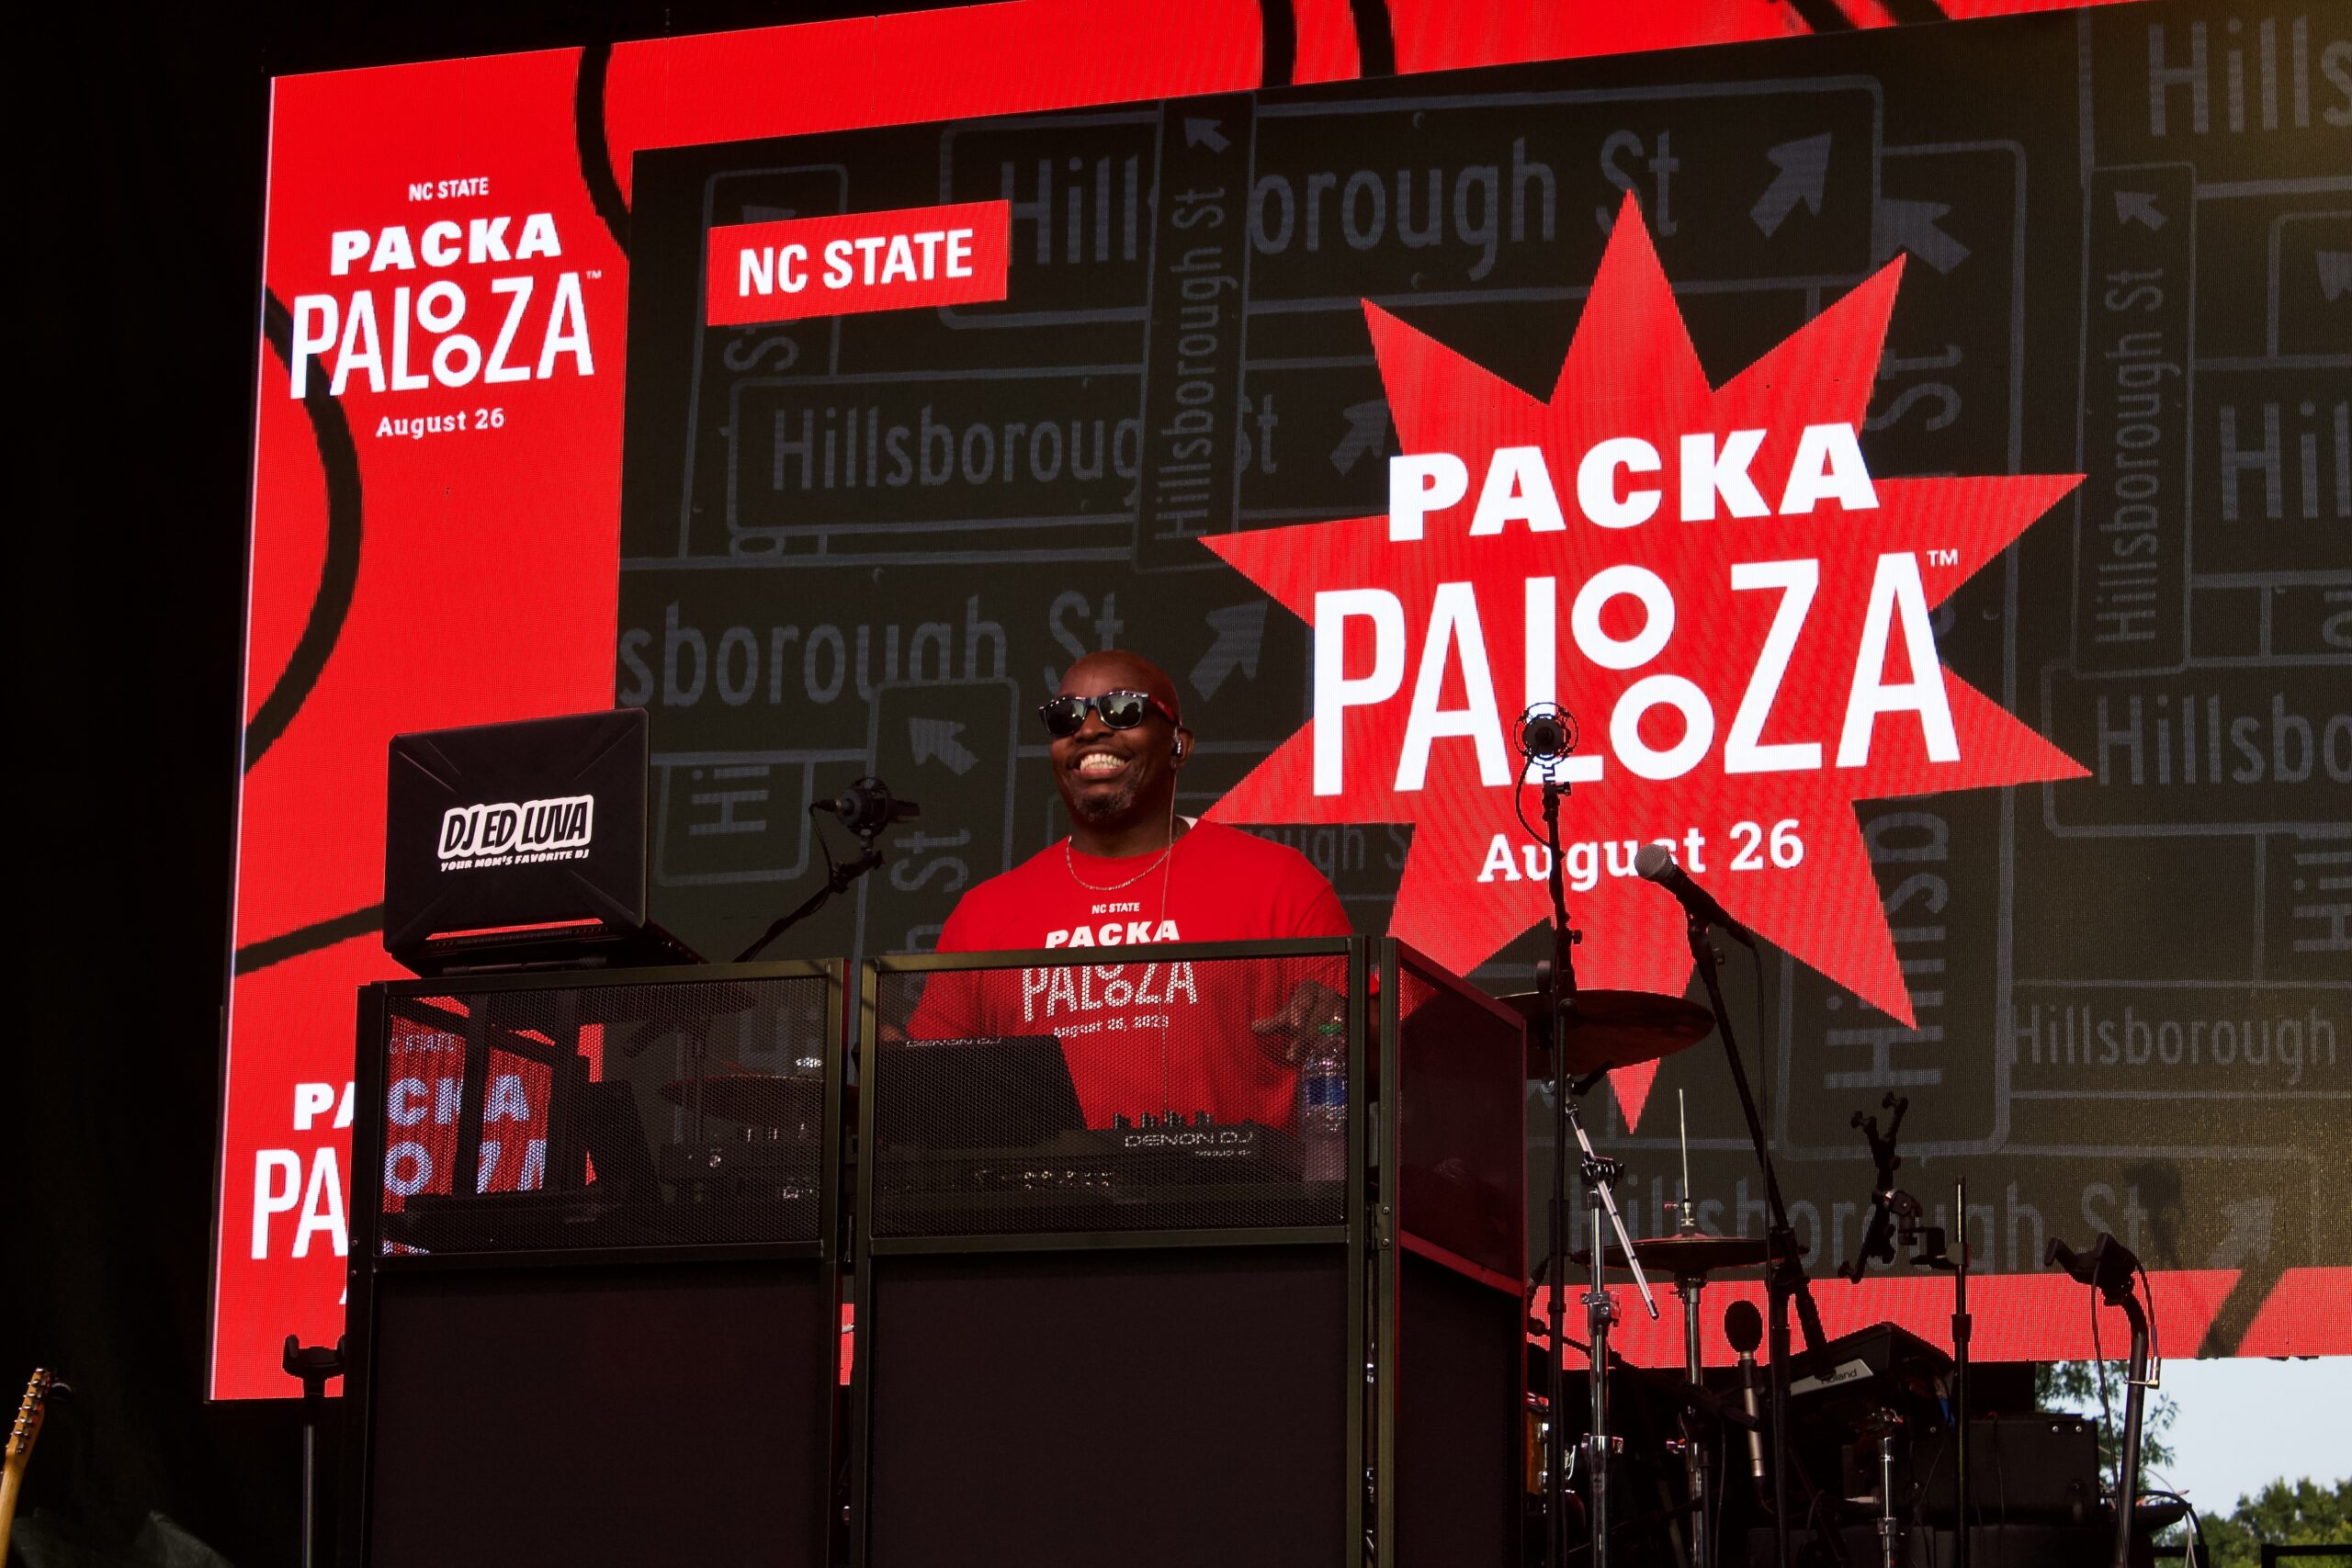 DJ on stage in a red Packapalooza t-shirt with Packapalooza logos in the background.